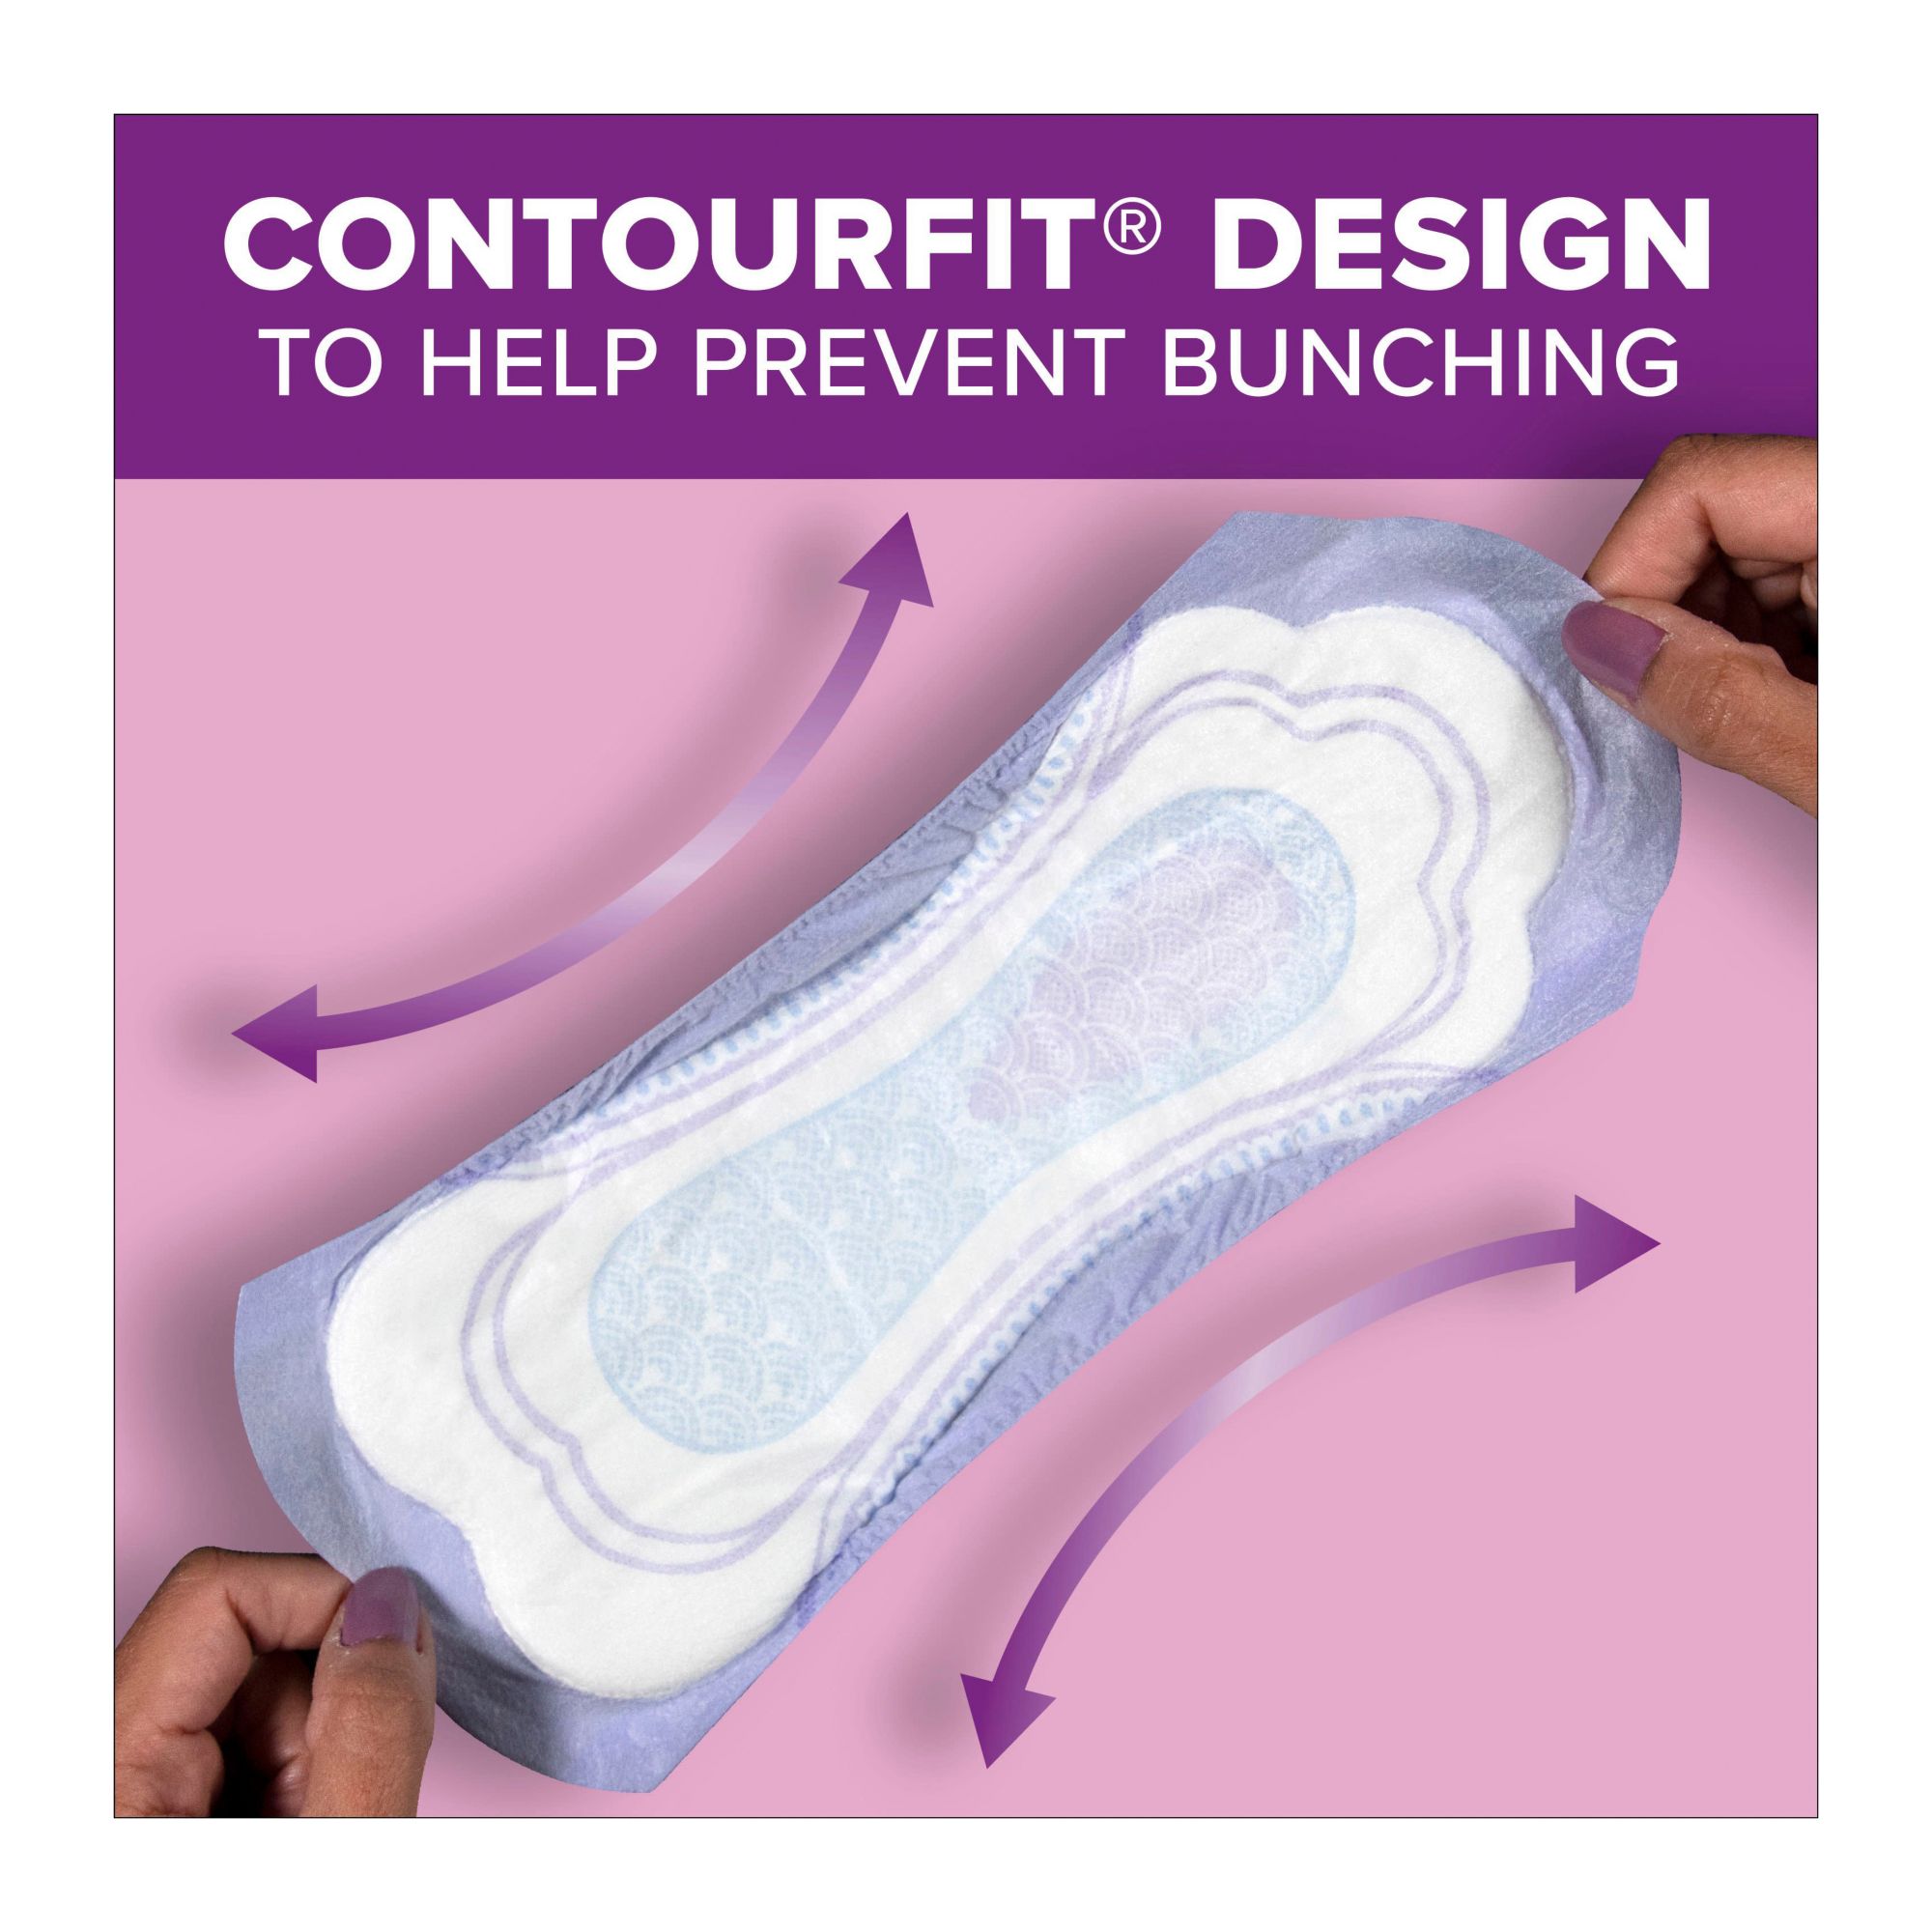 Poise Incontinence Pads, Ultimate Absorbency 